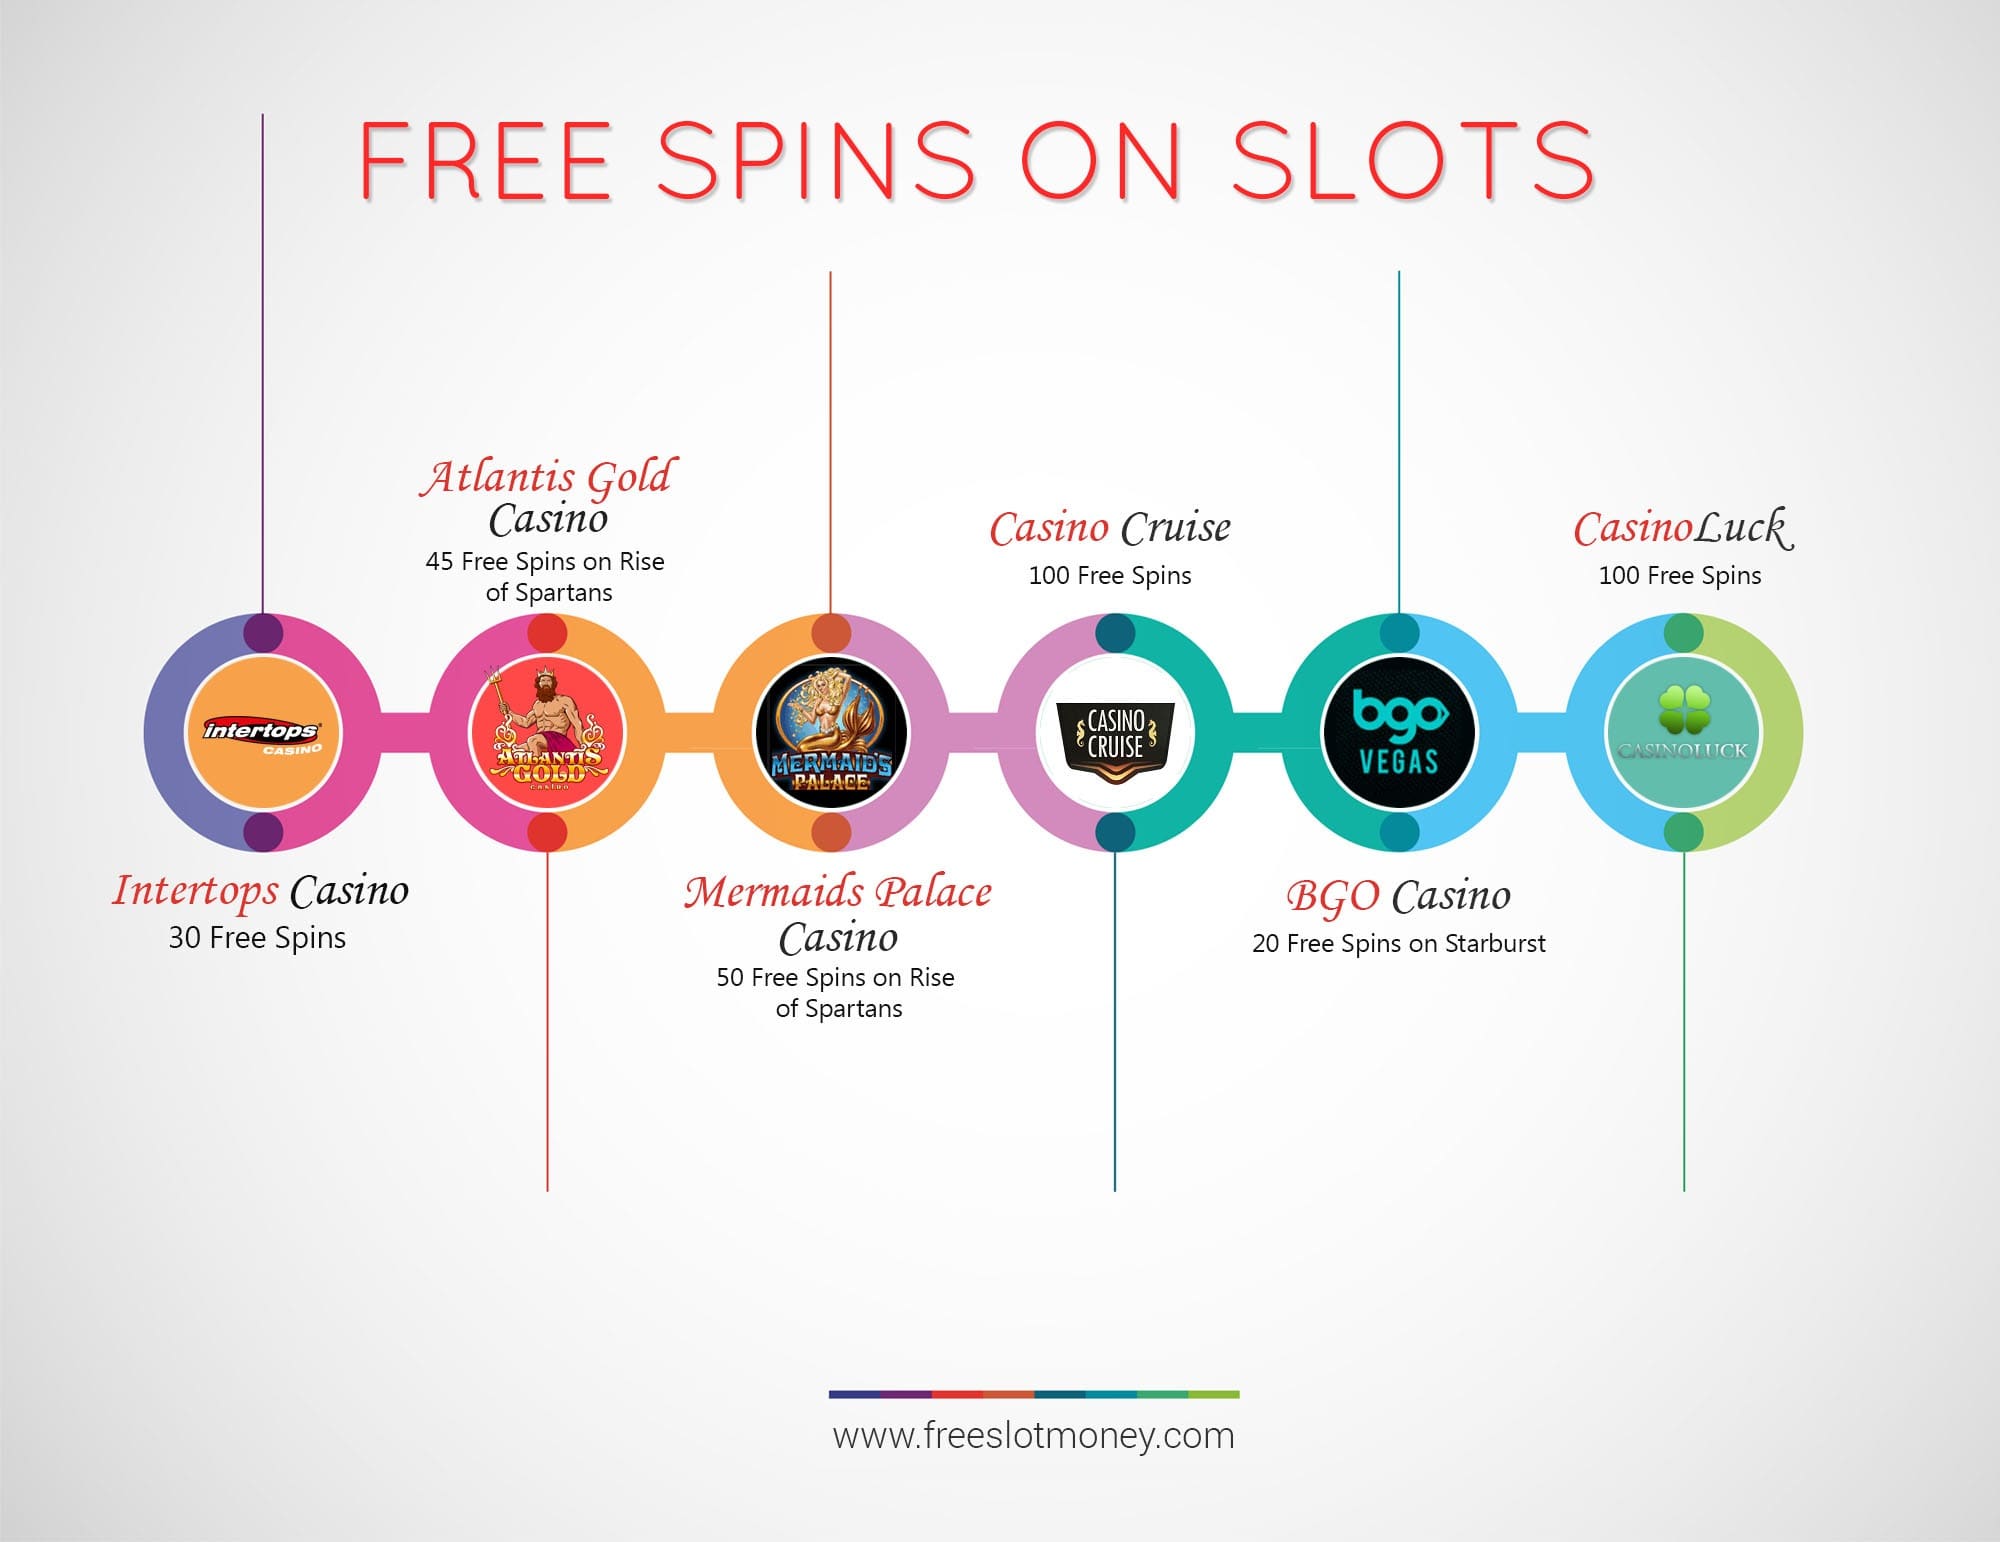 Free spins on casino